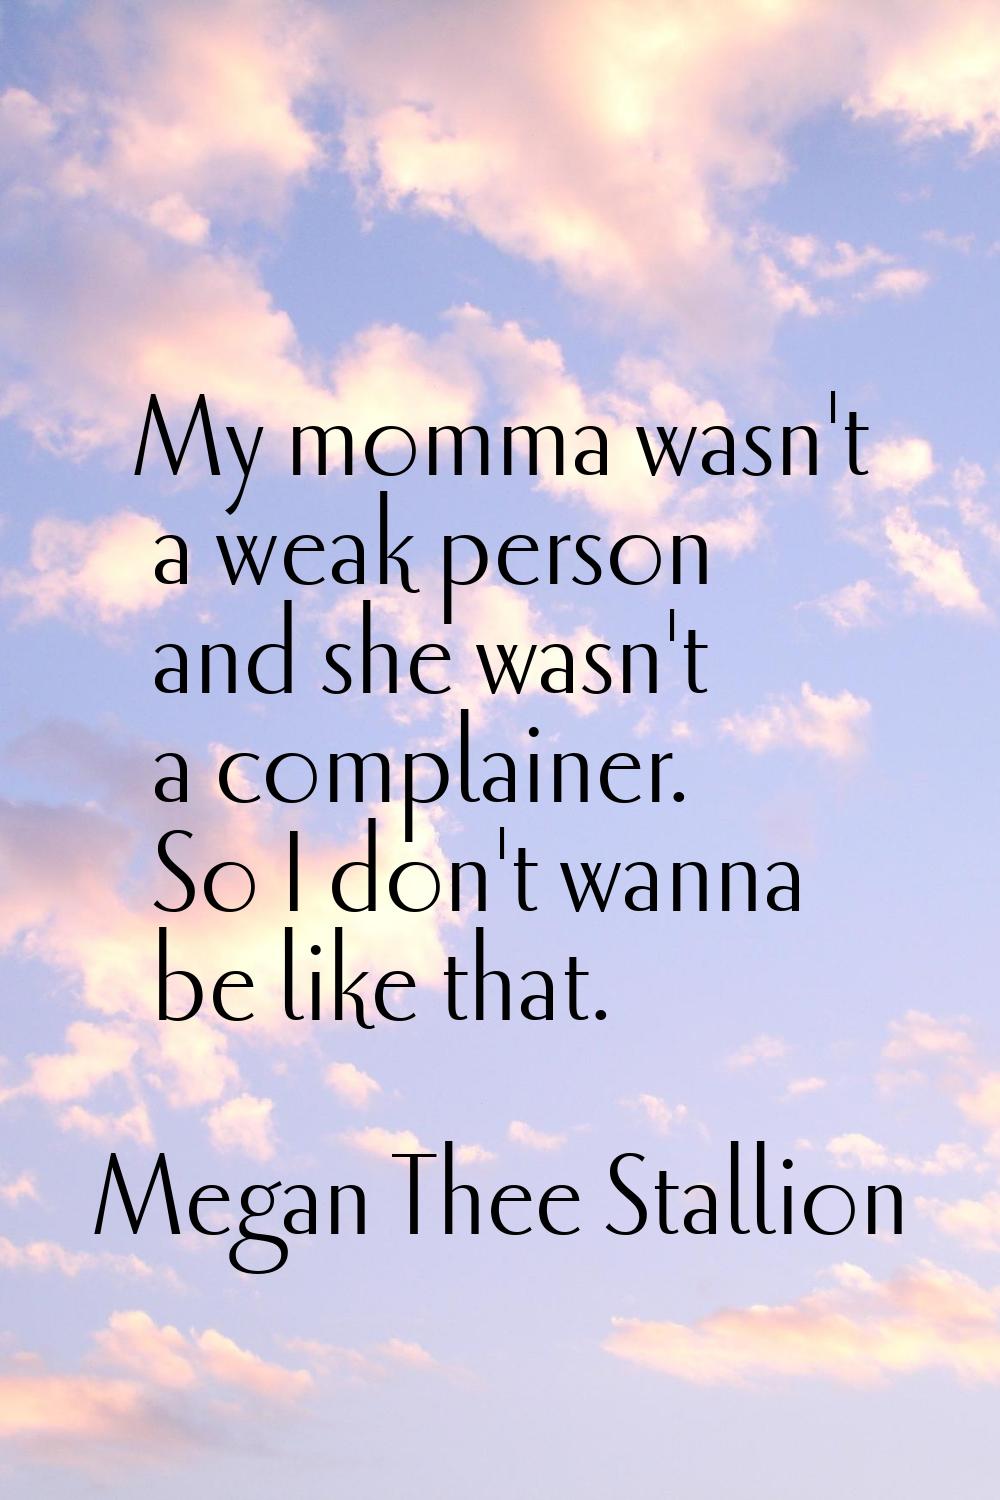 My momma wasn't a weak person and she wasn't a complainer. So I don't wanna be like that.